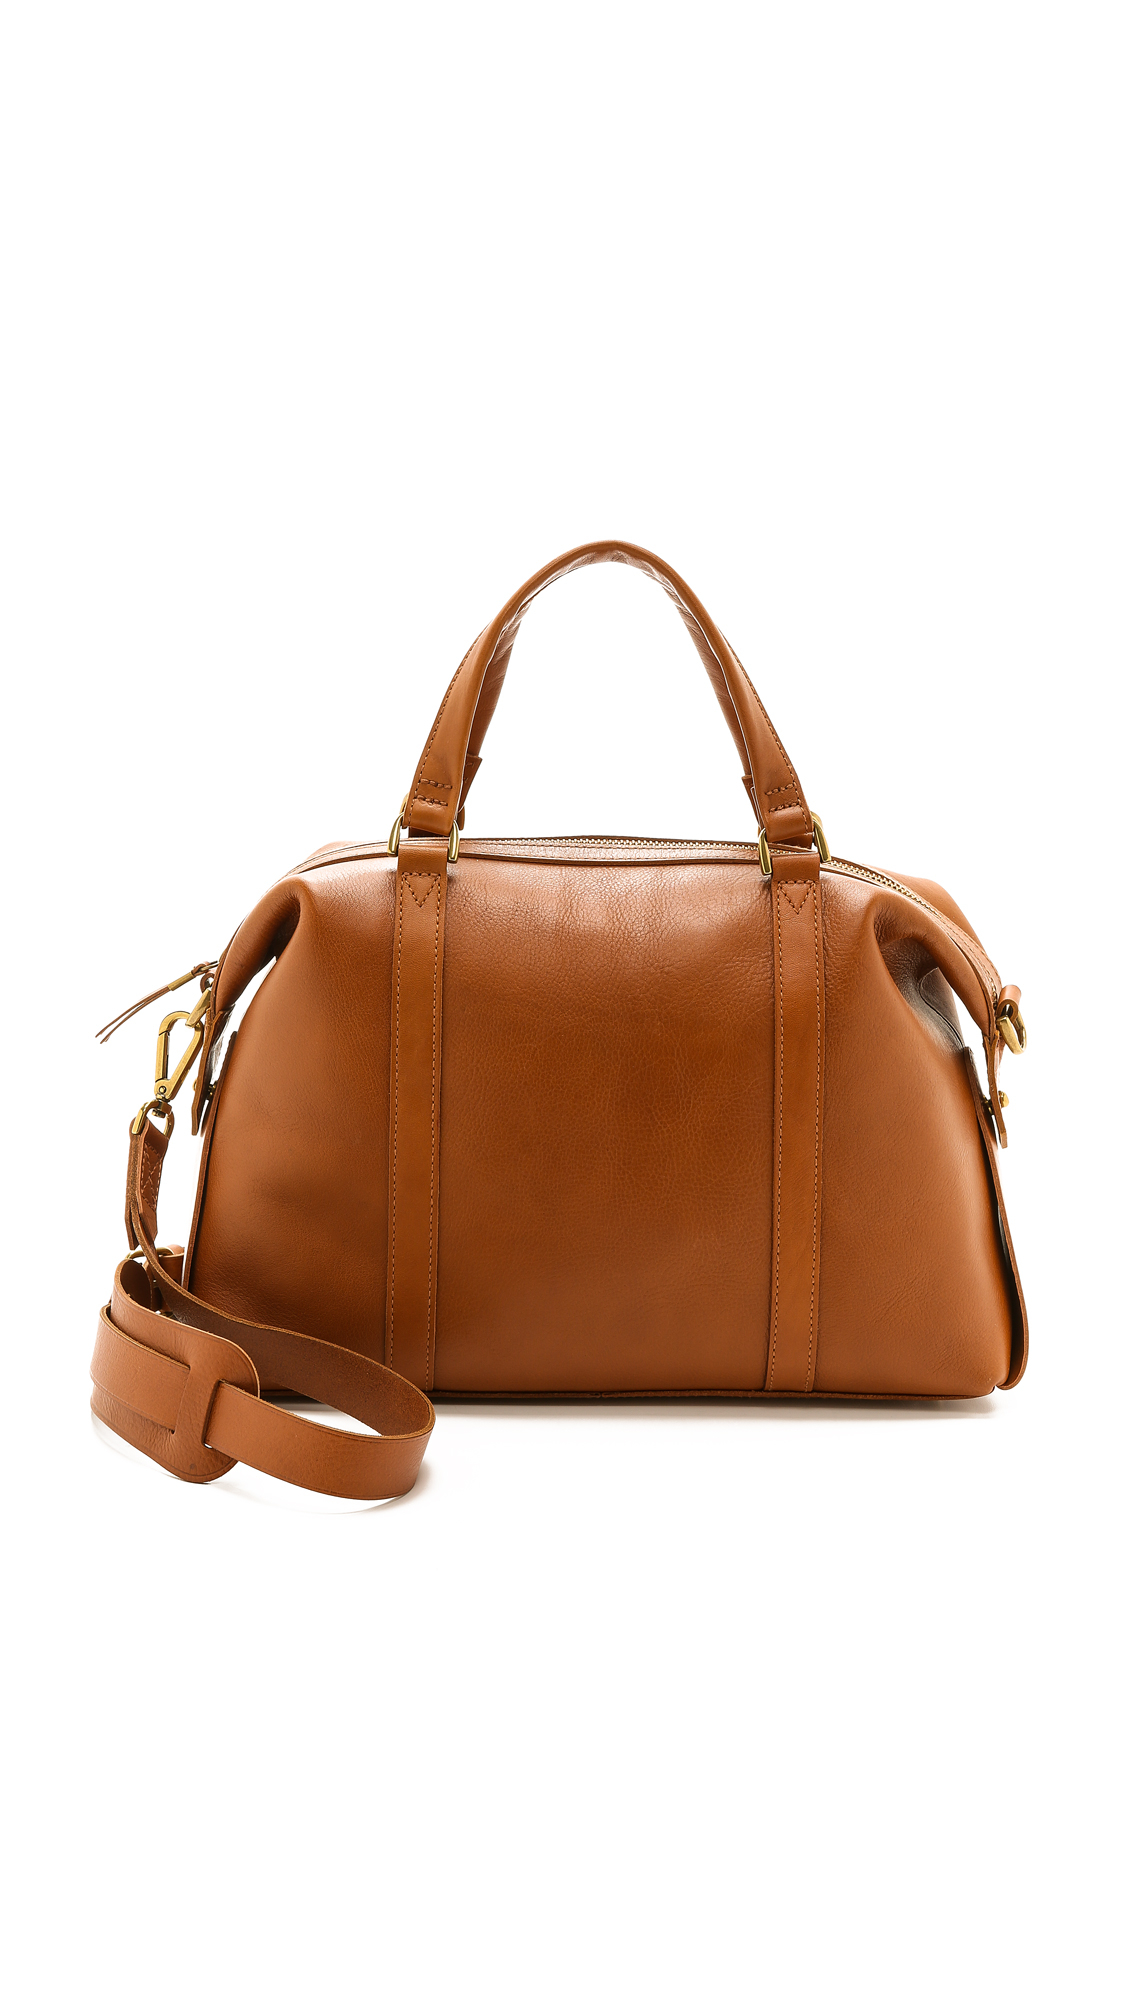 Lyst - Madewell Glasgow Satchel - English Saddle in Brown